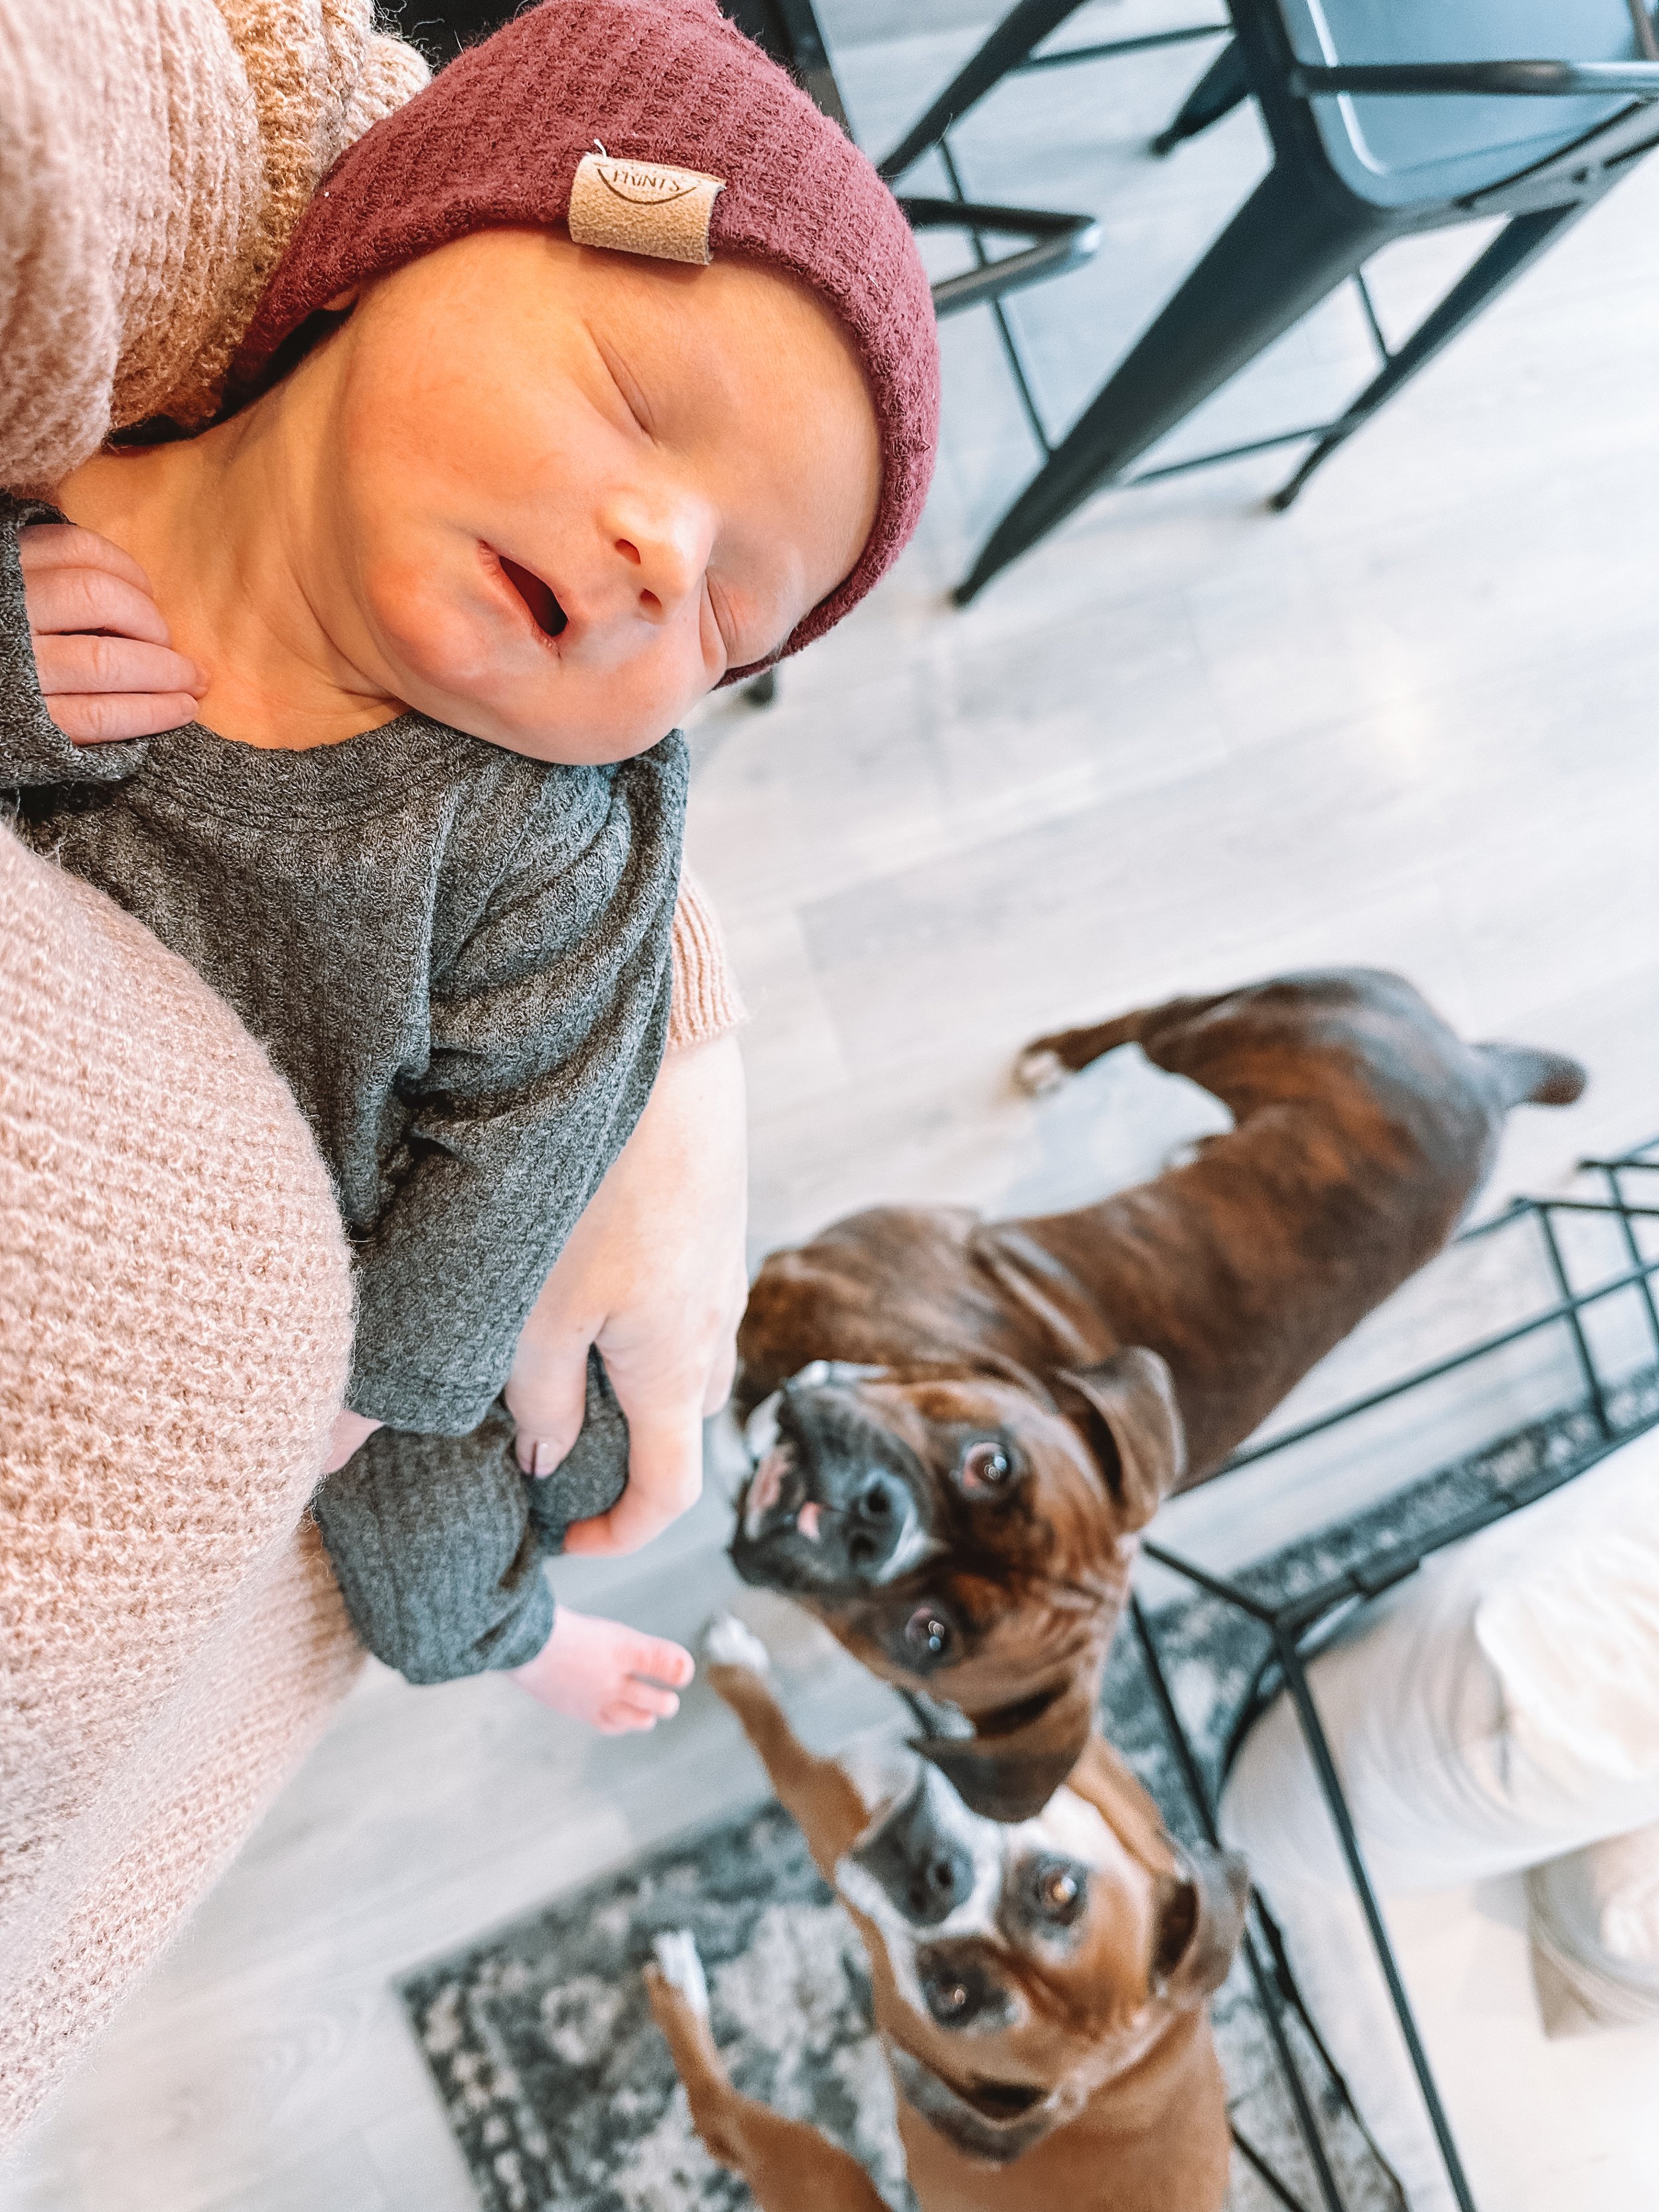 3 Tips for New Moms [in the newborn stage]